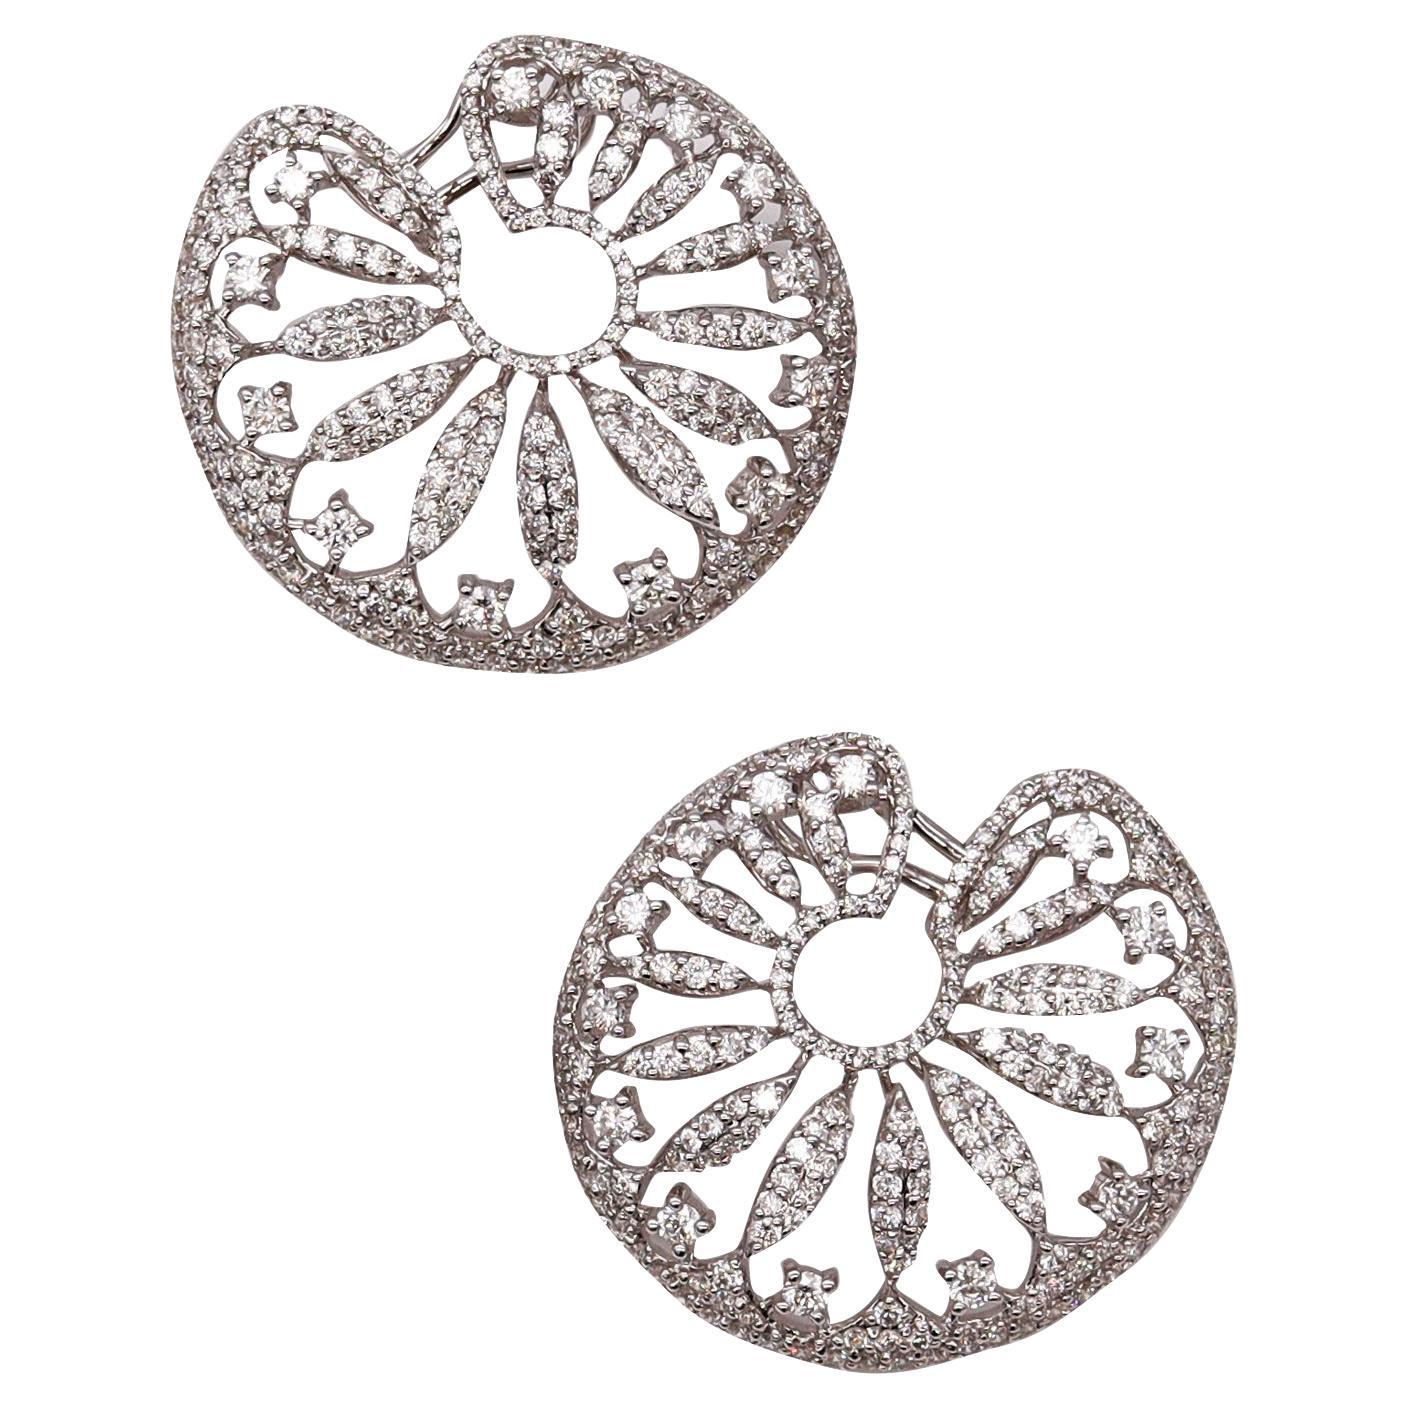 Salavetti Milano Clip-Earrings 18Kt White Gold With 6.38 Cts In VVS Diamonds For Sale